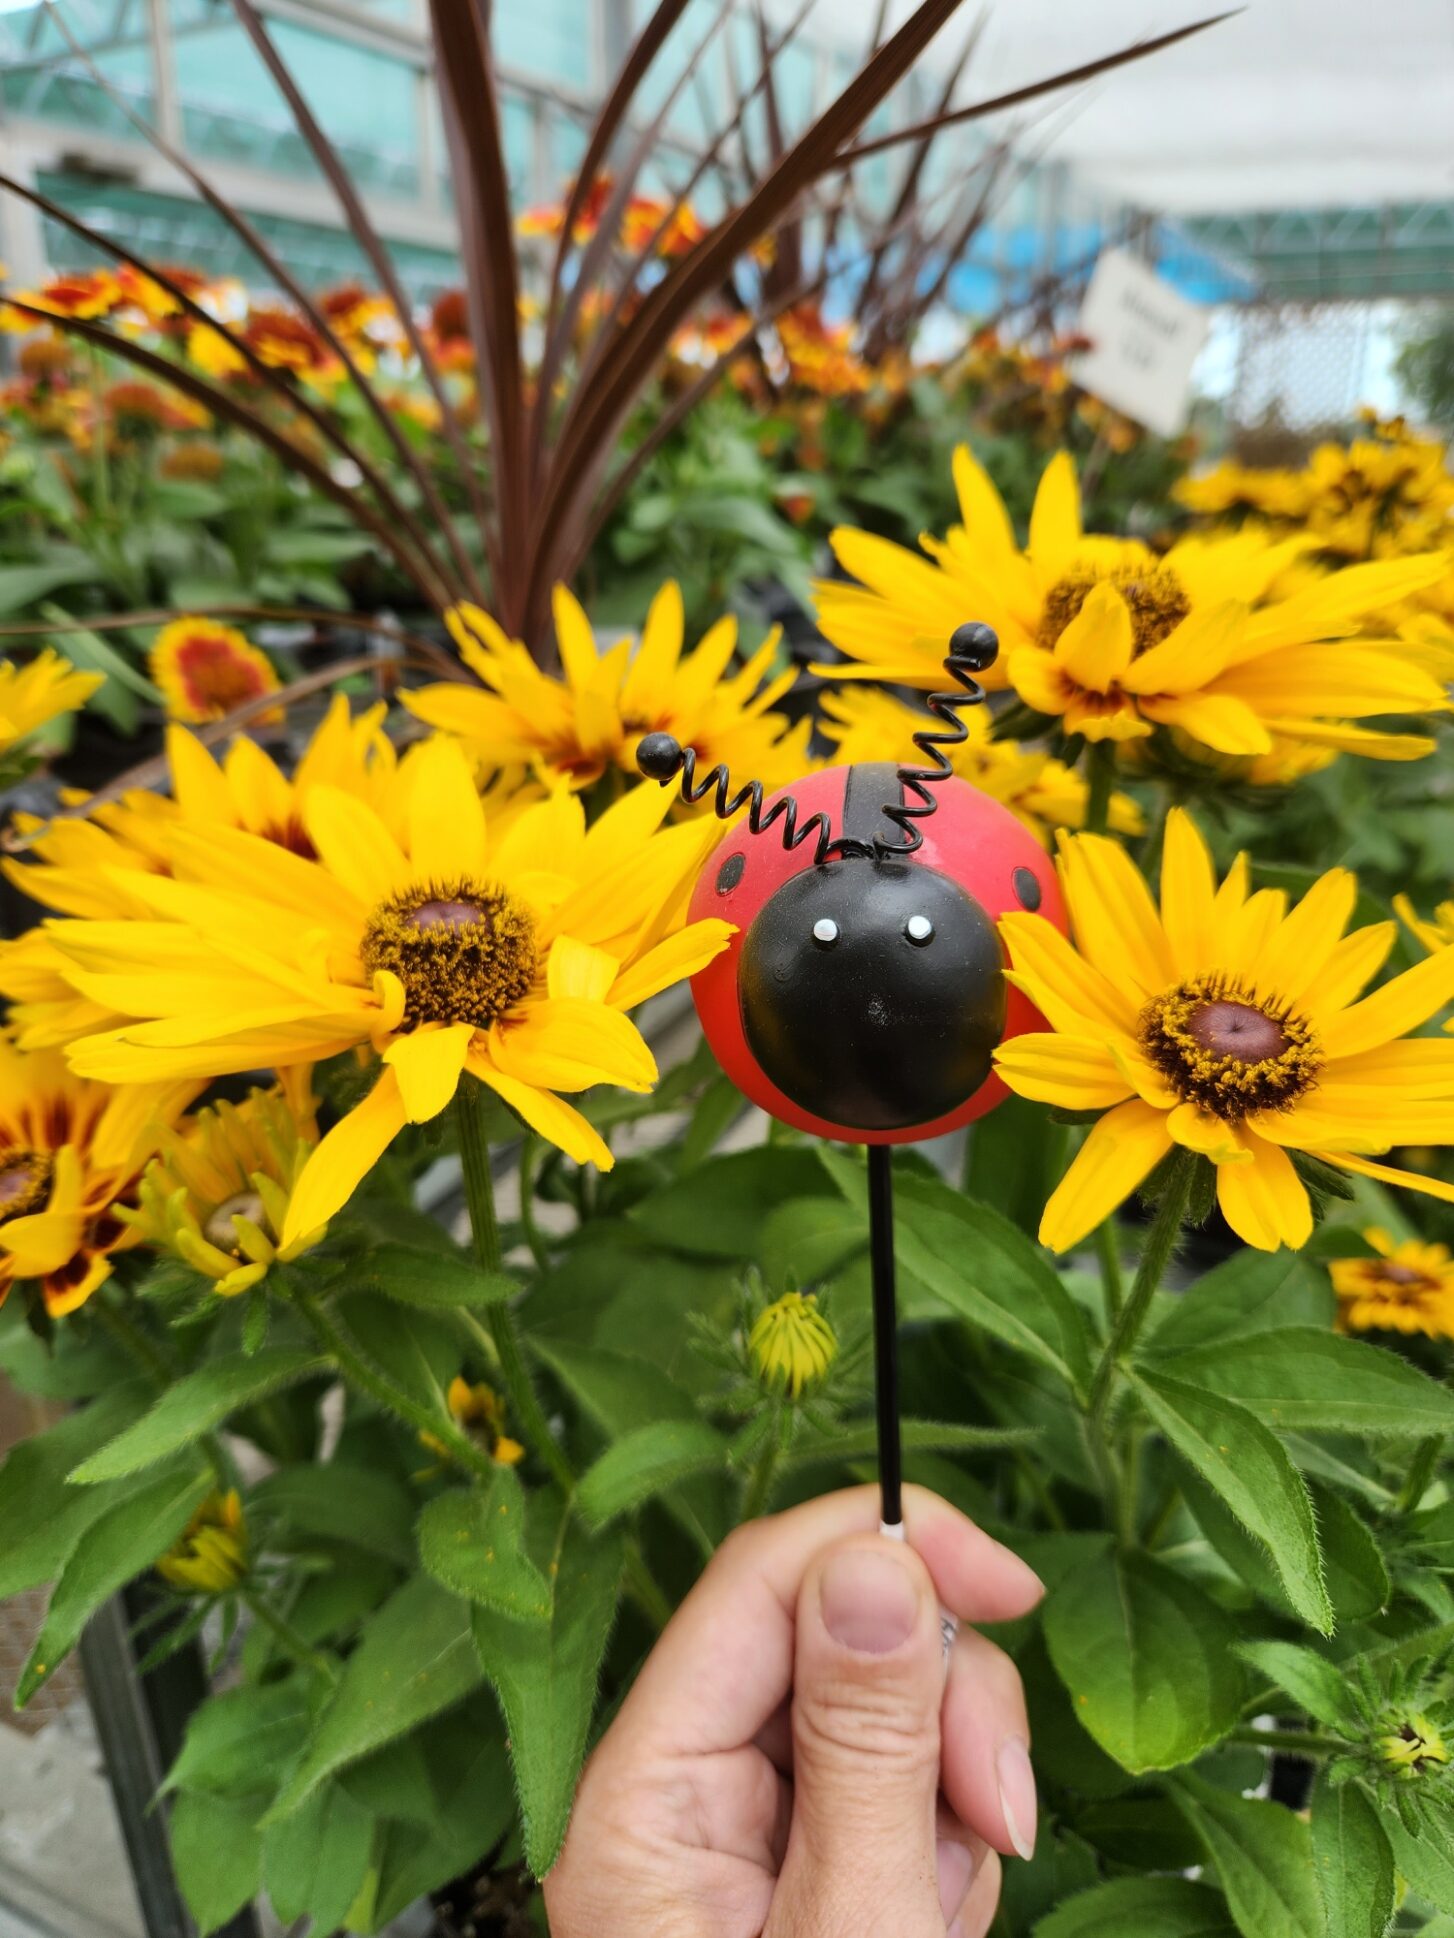 holding a lady bug pic with yellow flowers behind